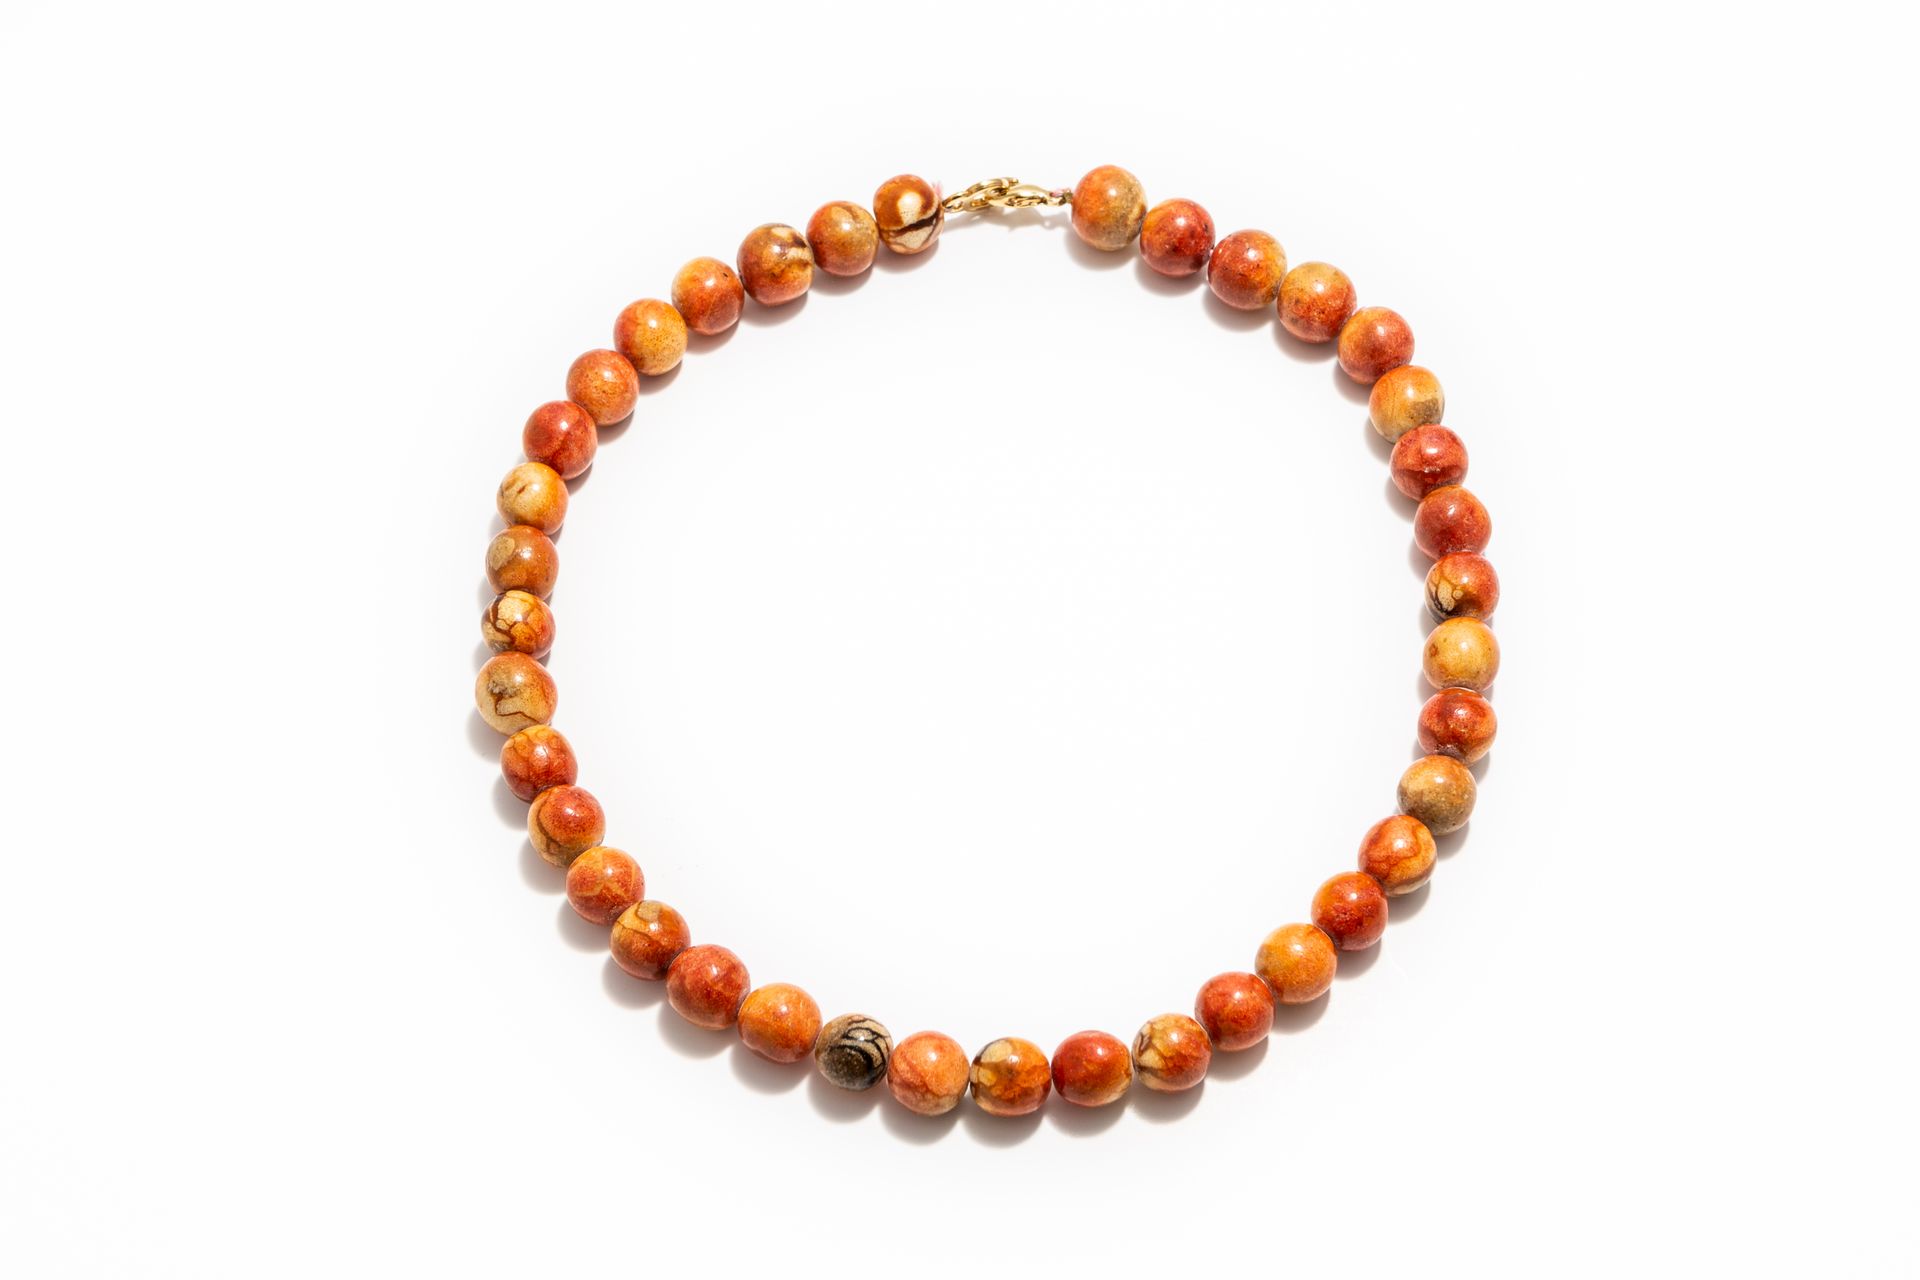 Null Necklace of pressed coral pearl

Gross weight : 118 g.